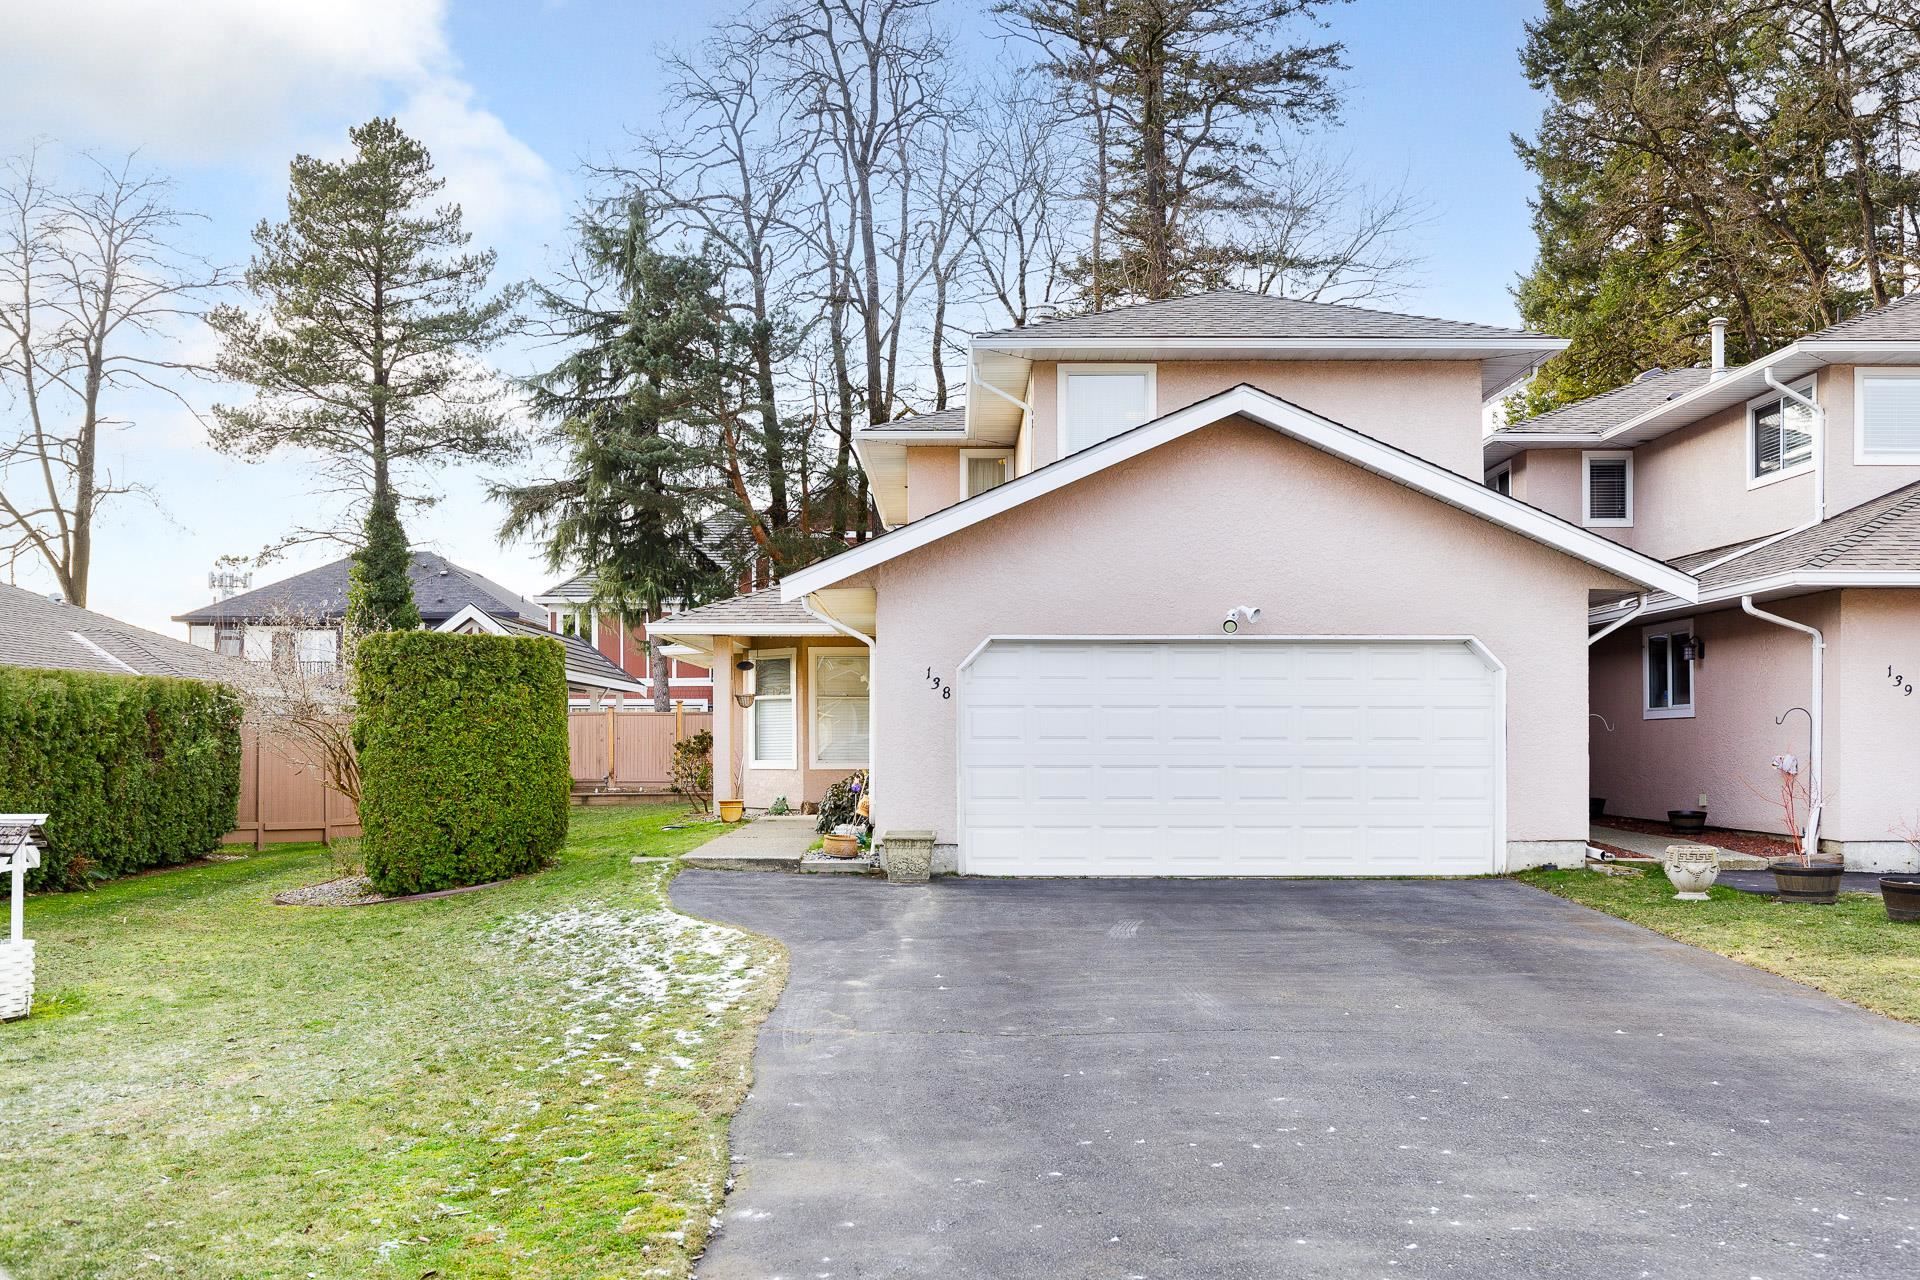 This property has sold: 138 15501 89A AVE in SURREY